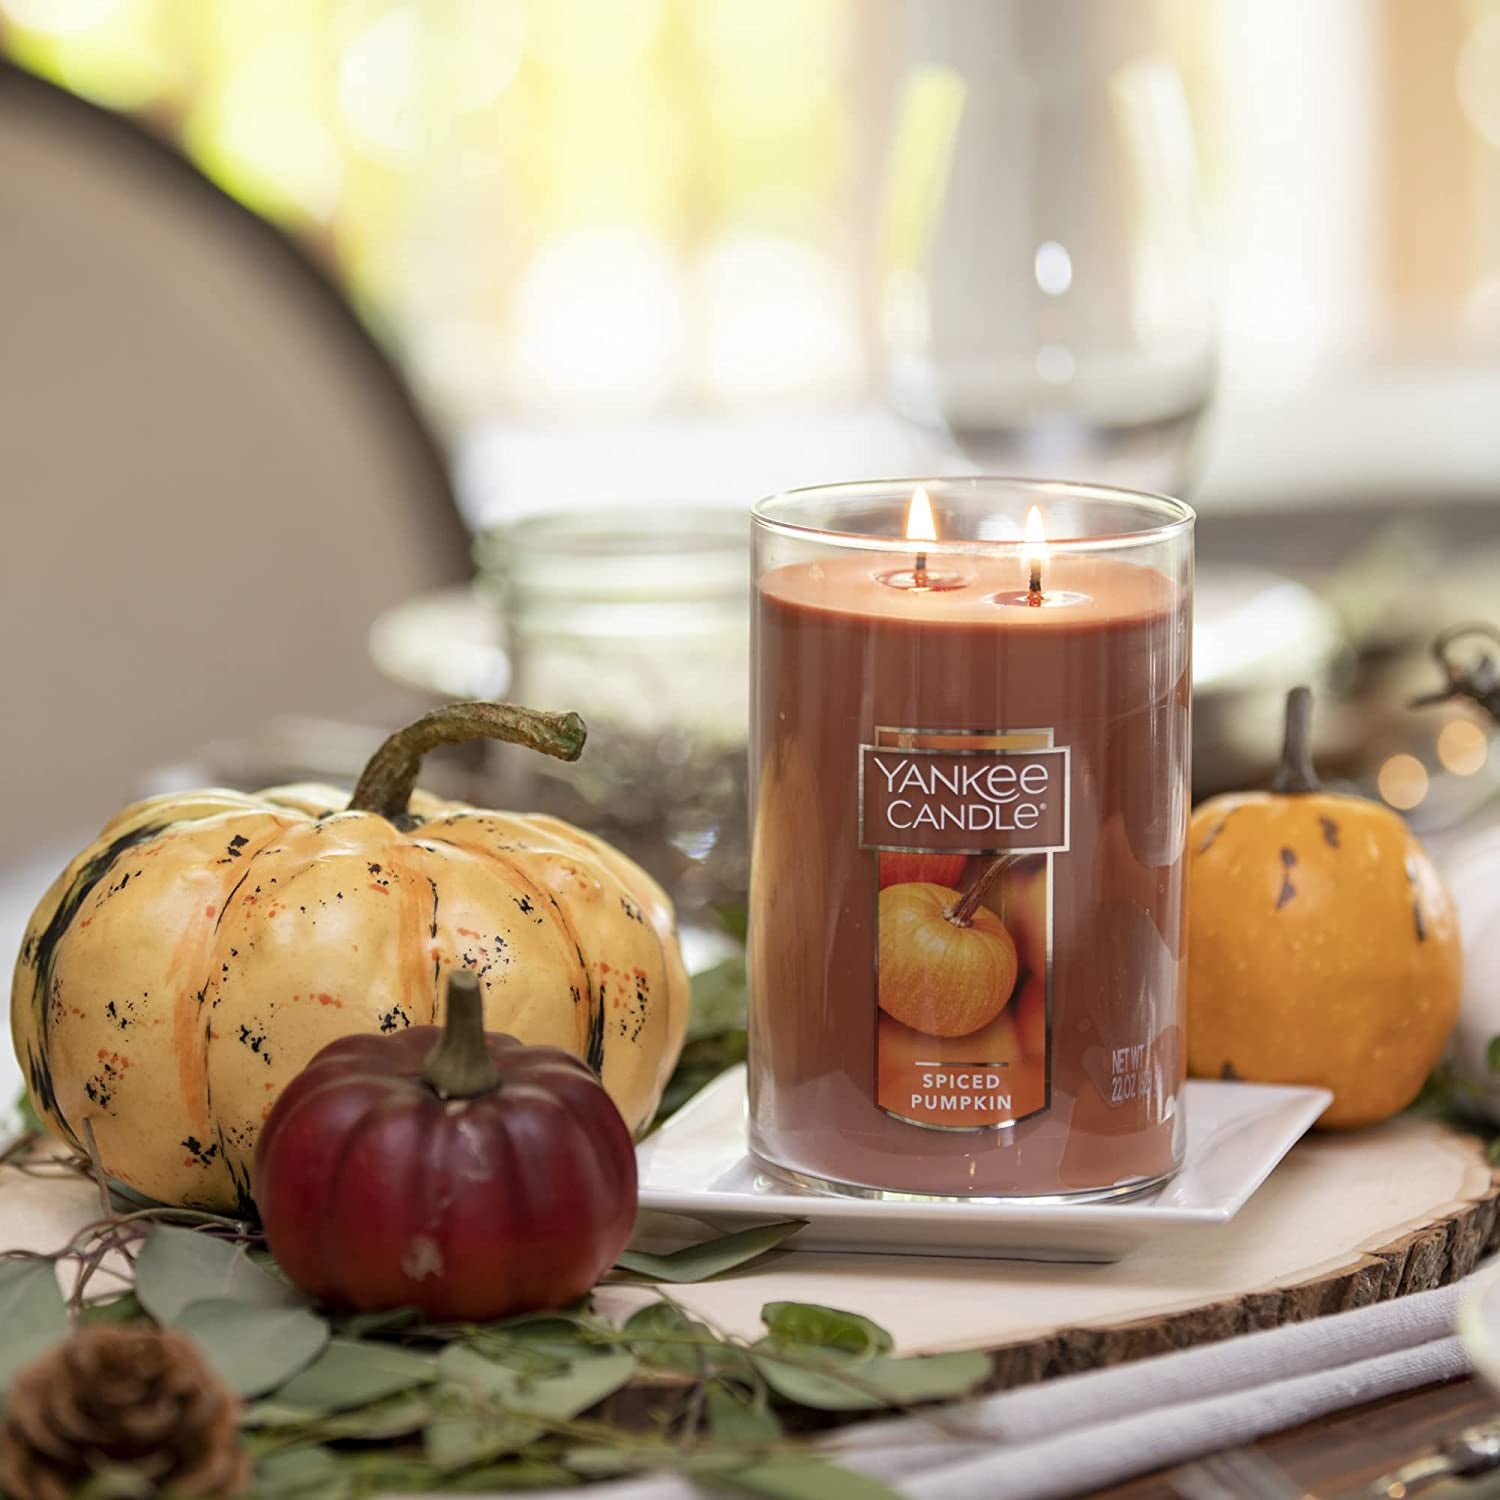 Yankee Candle large two-wick tumbler in spiced pumpkin